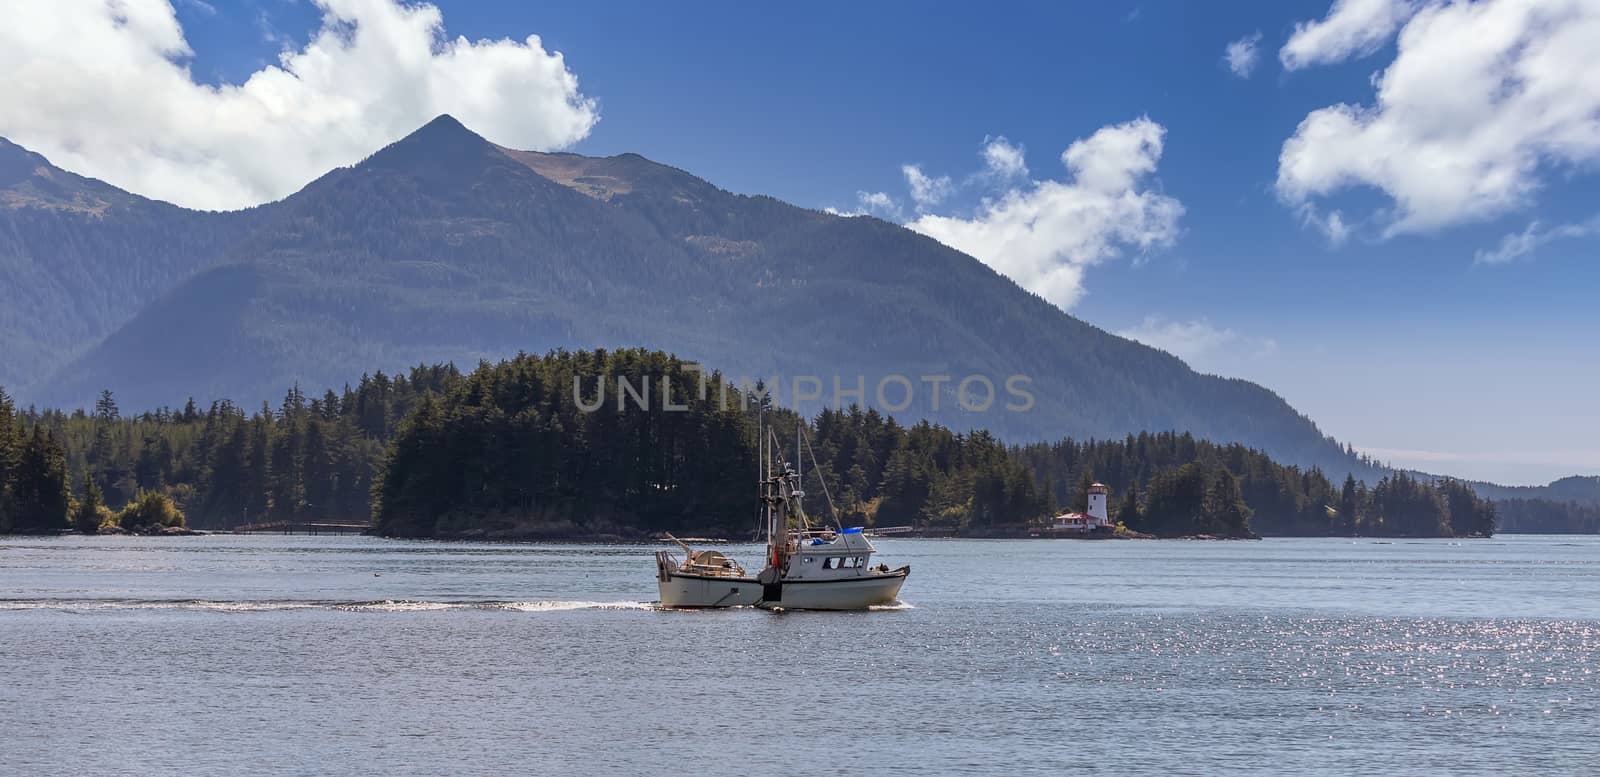 Shot of a commercial fishing boat sailing in a harbour in Sitka, AK. Green forest, mountains, beautiful blue sky with clouds, and a lighthouse in the background.